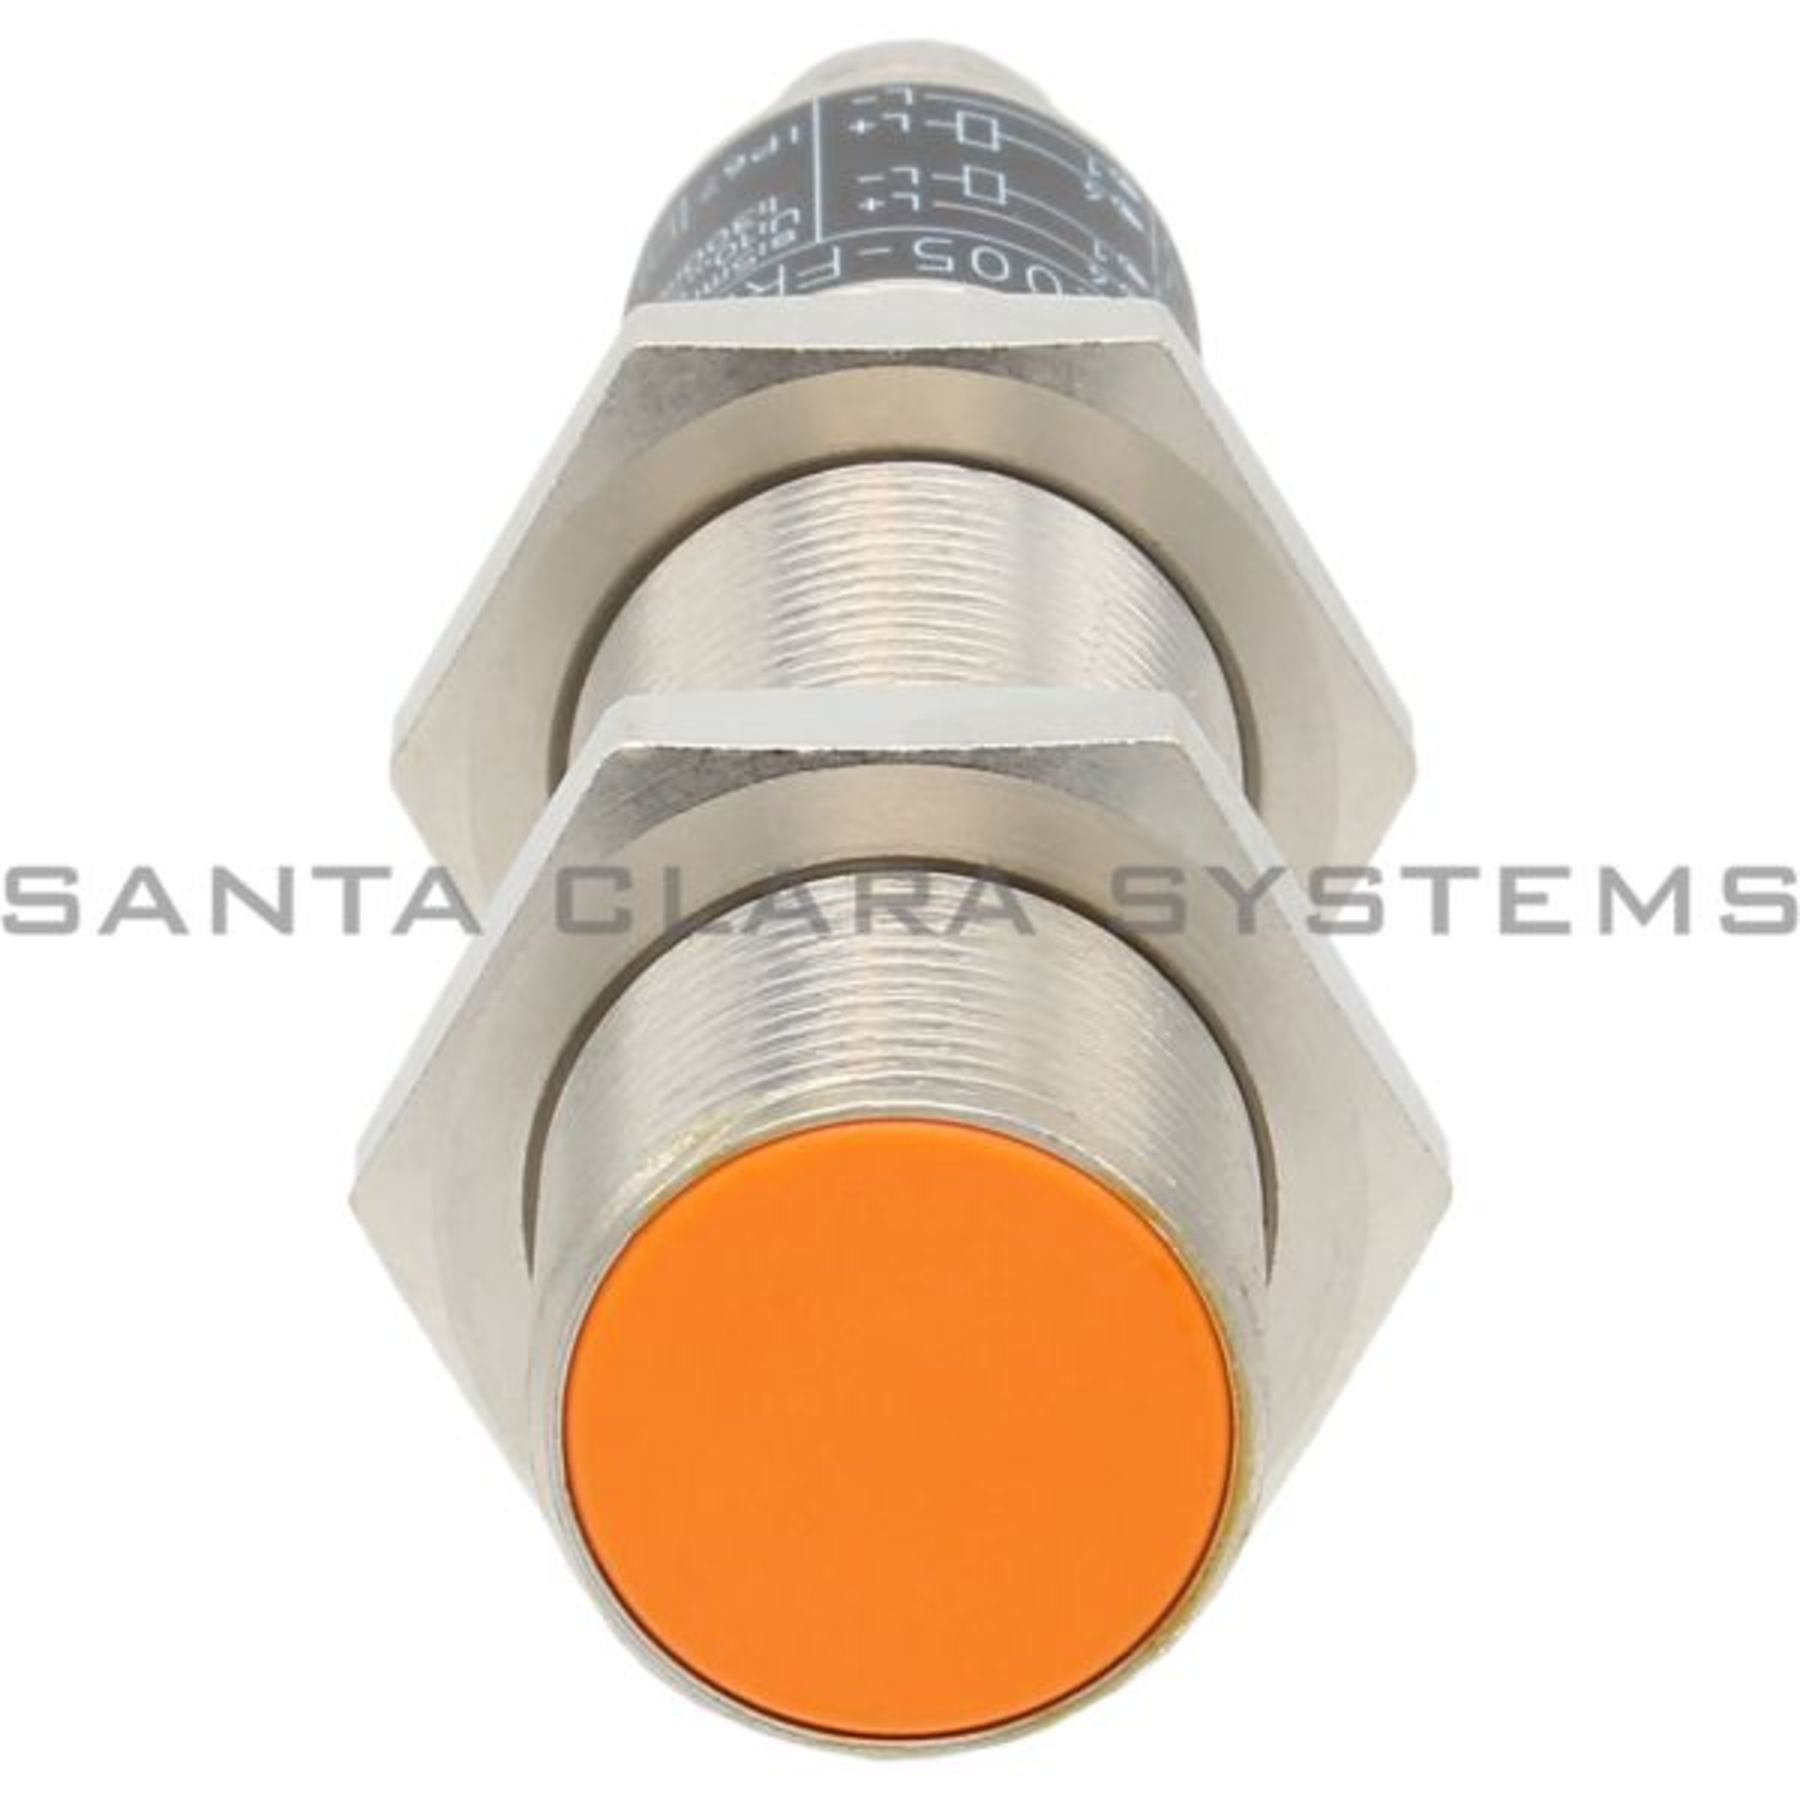 IG5773 Efector In stock and ready to ship - Santa Clara Systems